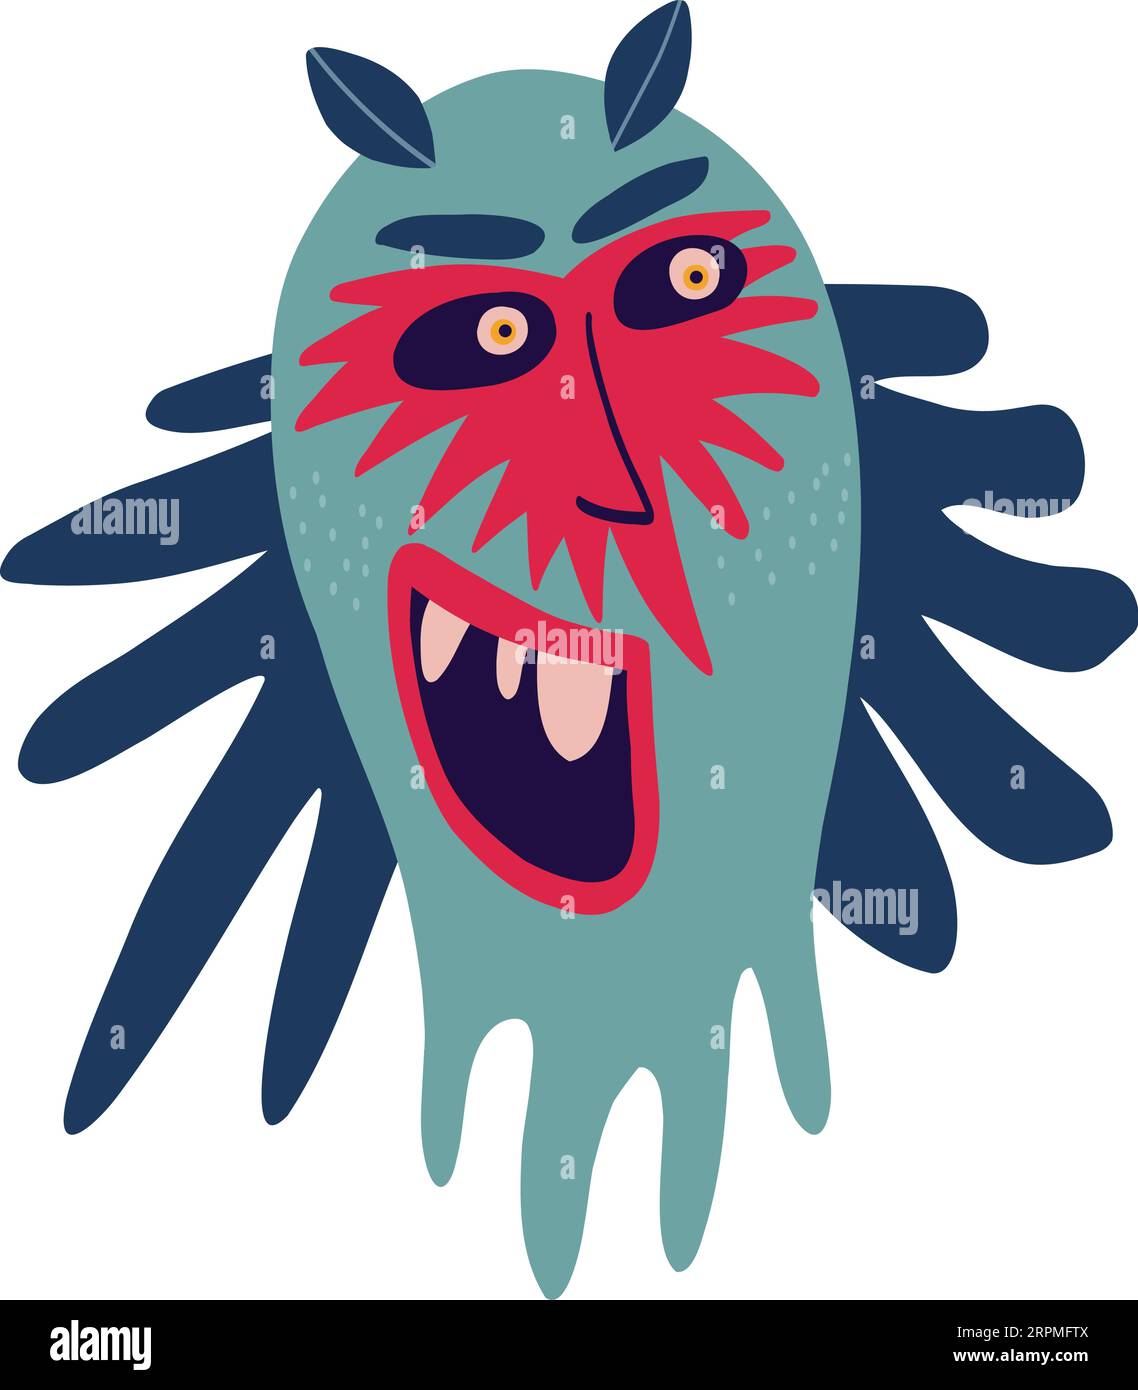 Creepy funky funny character monster gin with funny smile face. Illustration in a modern childish hand-drawn style Stock Vector